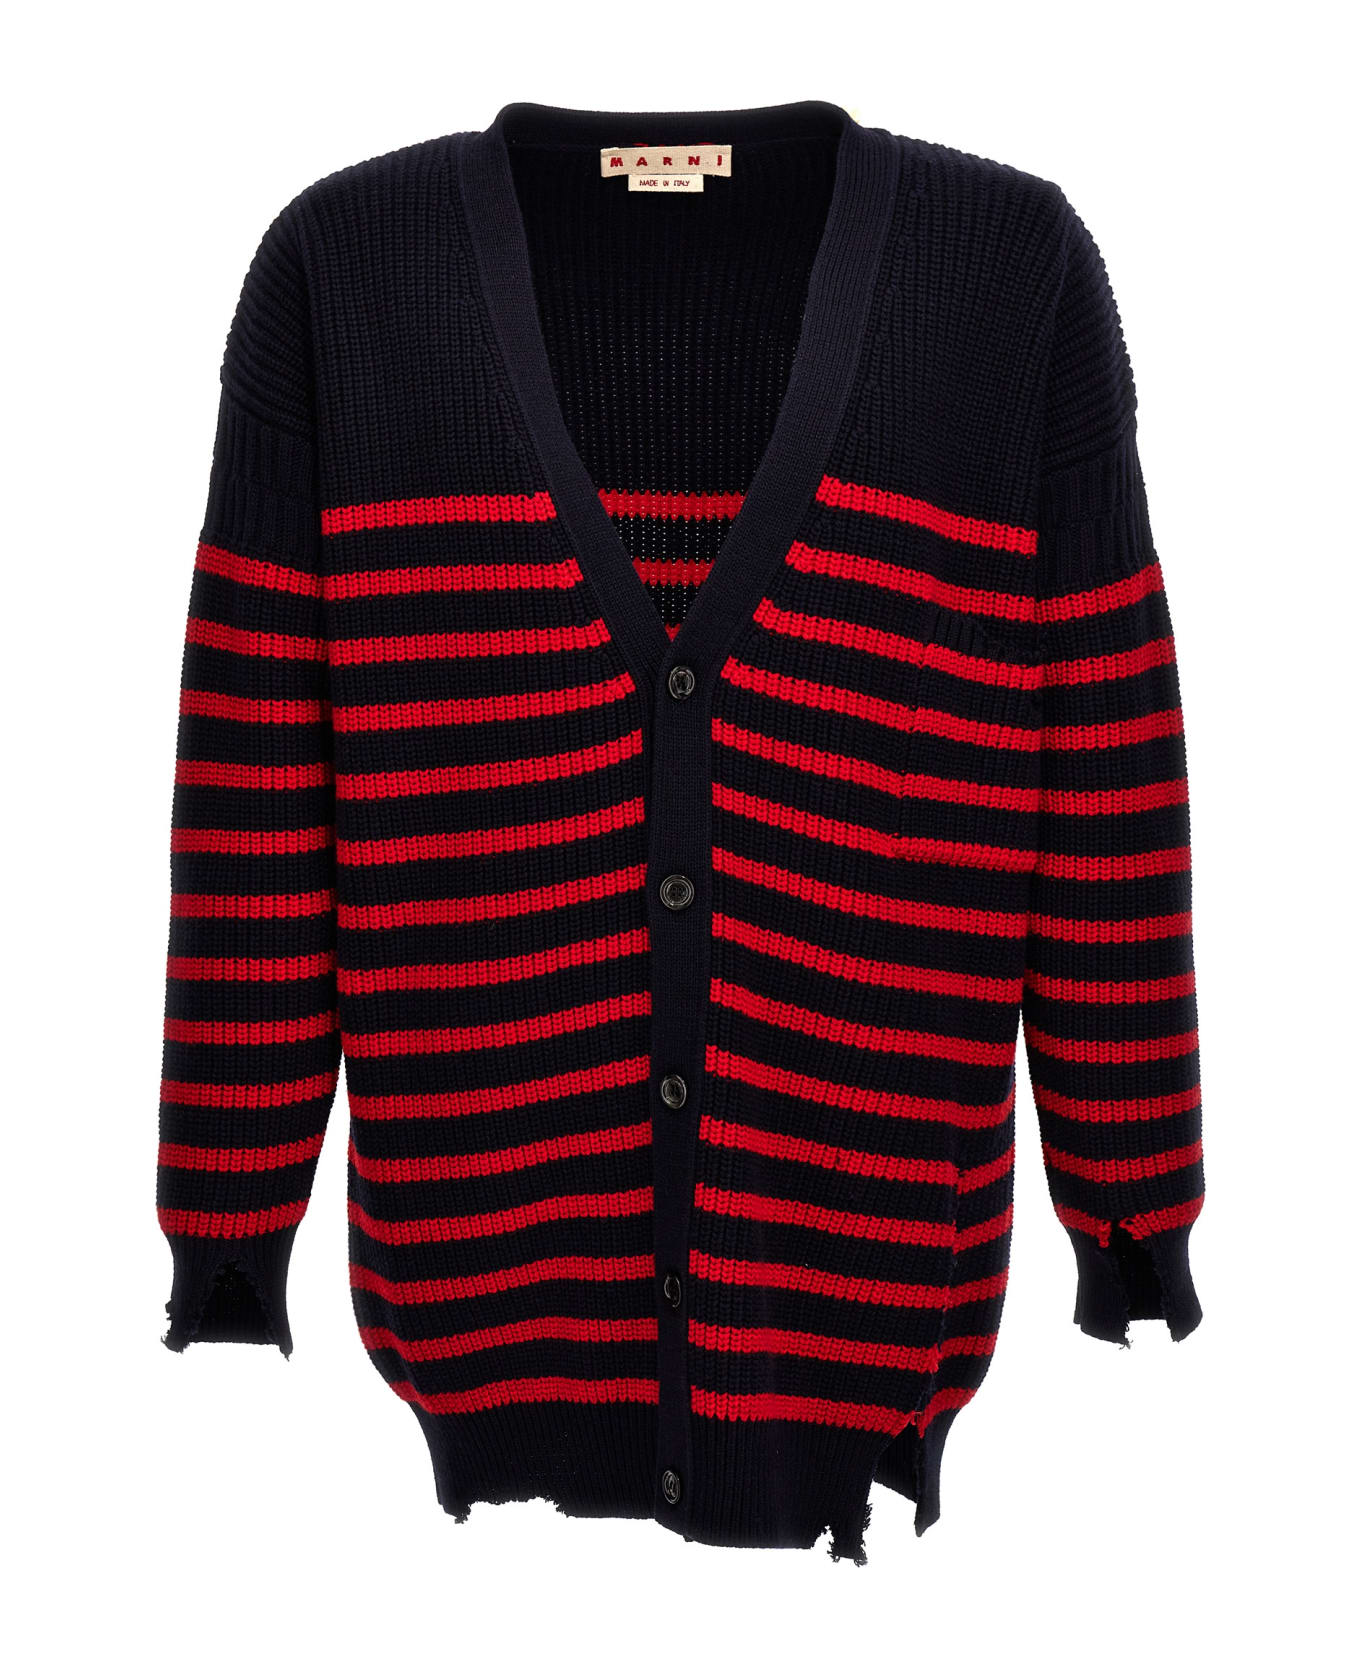 Marni Destroyed Effect Striped Cardigan - Multicolor